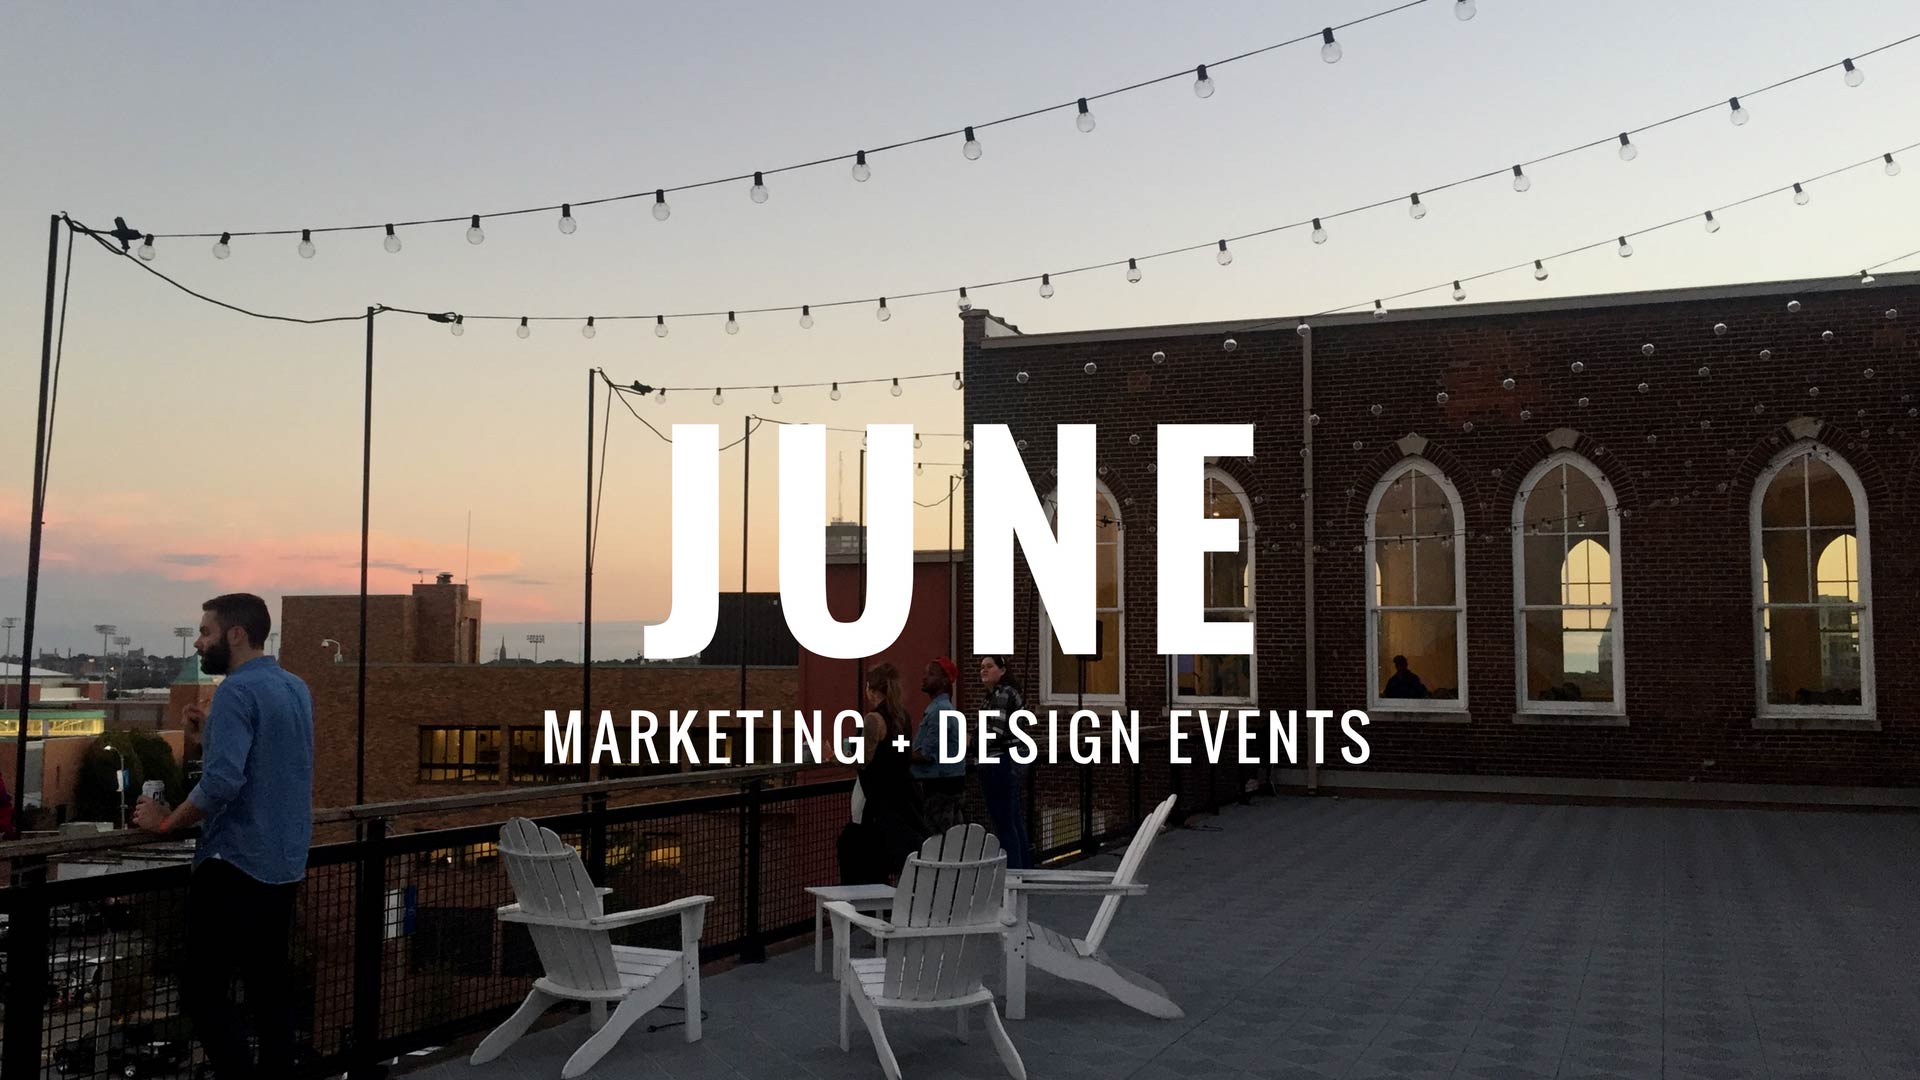 June 2017 Marketing and Design Events